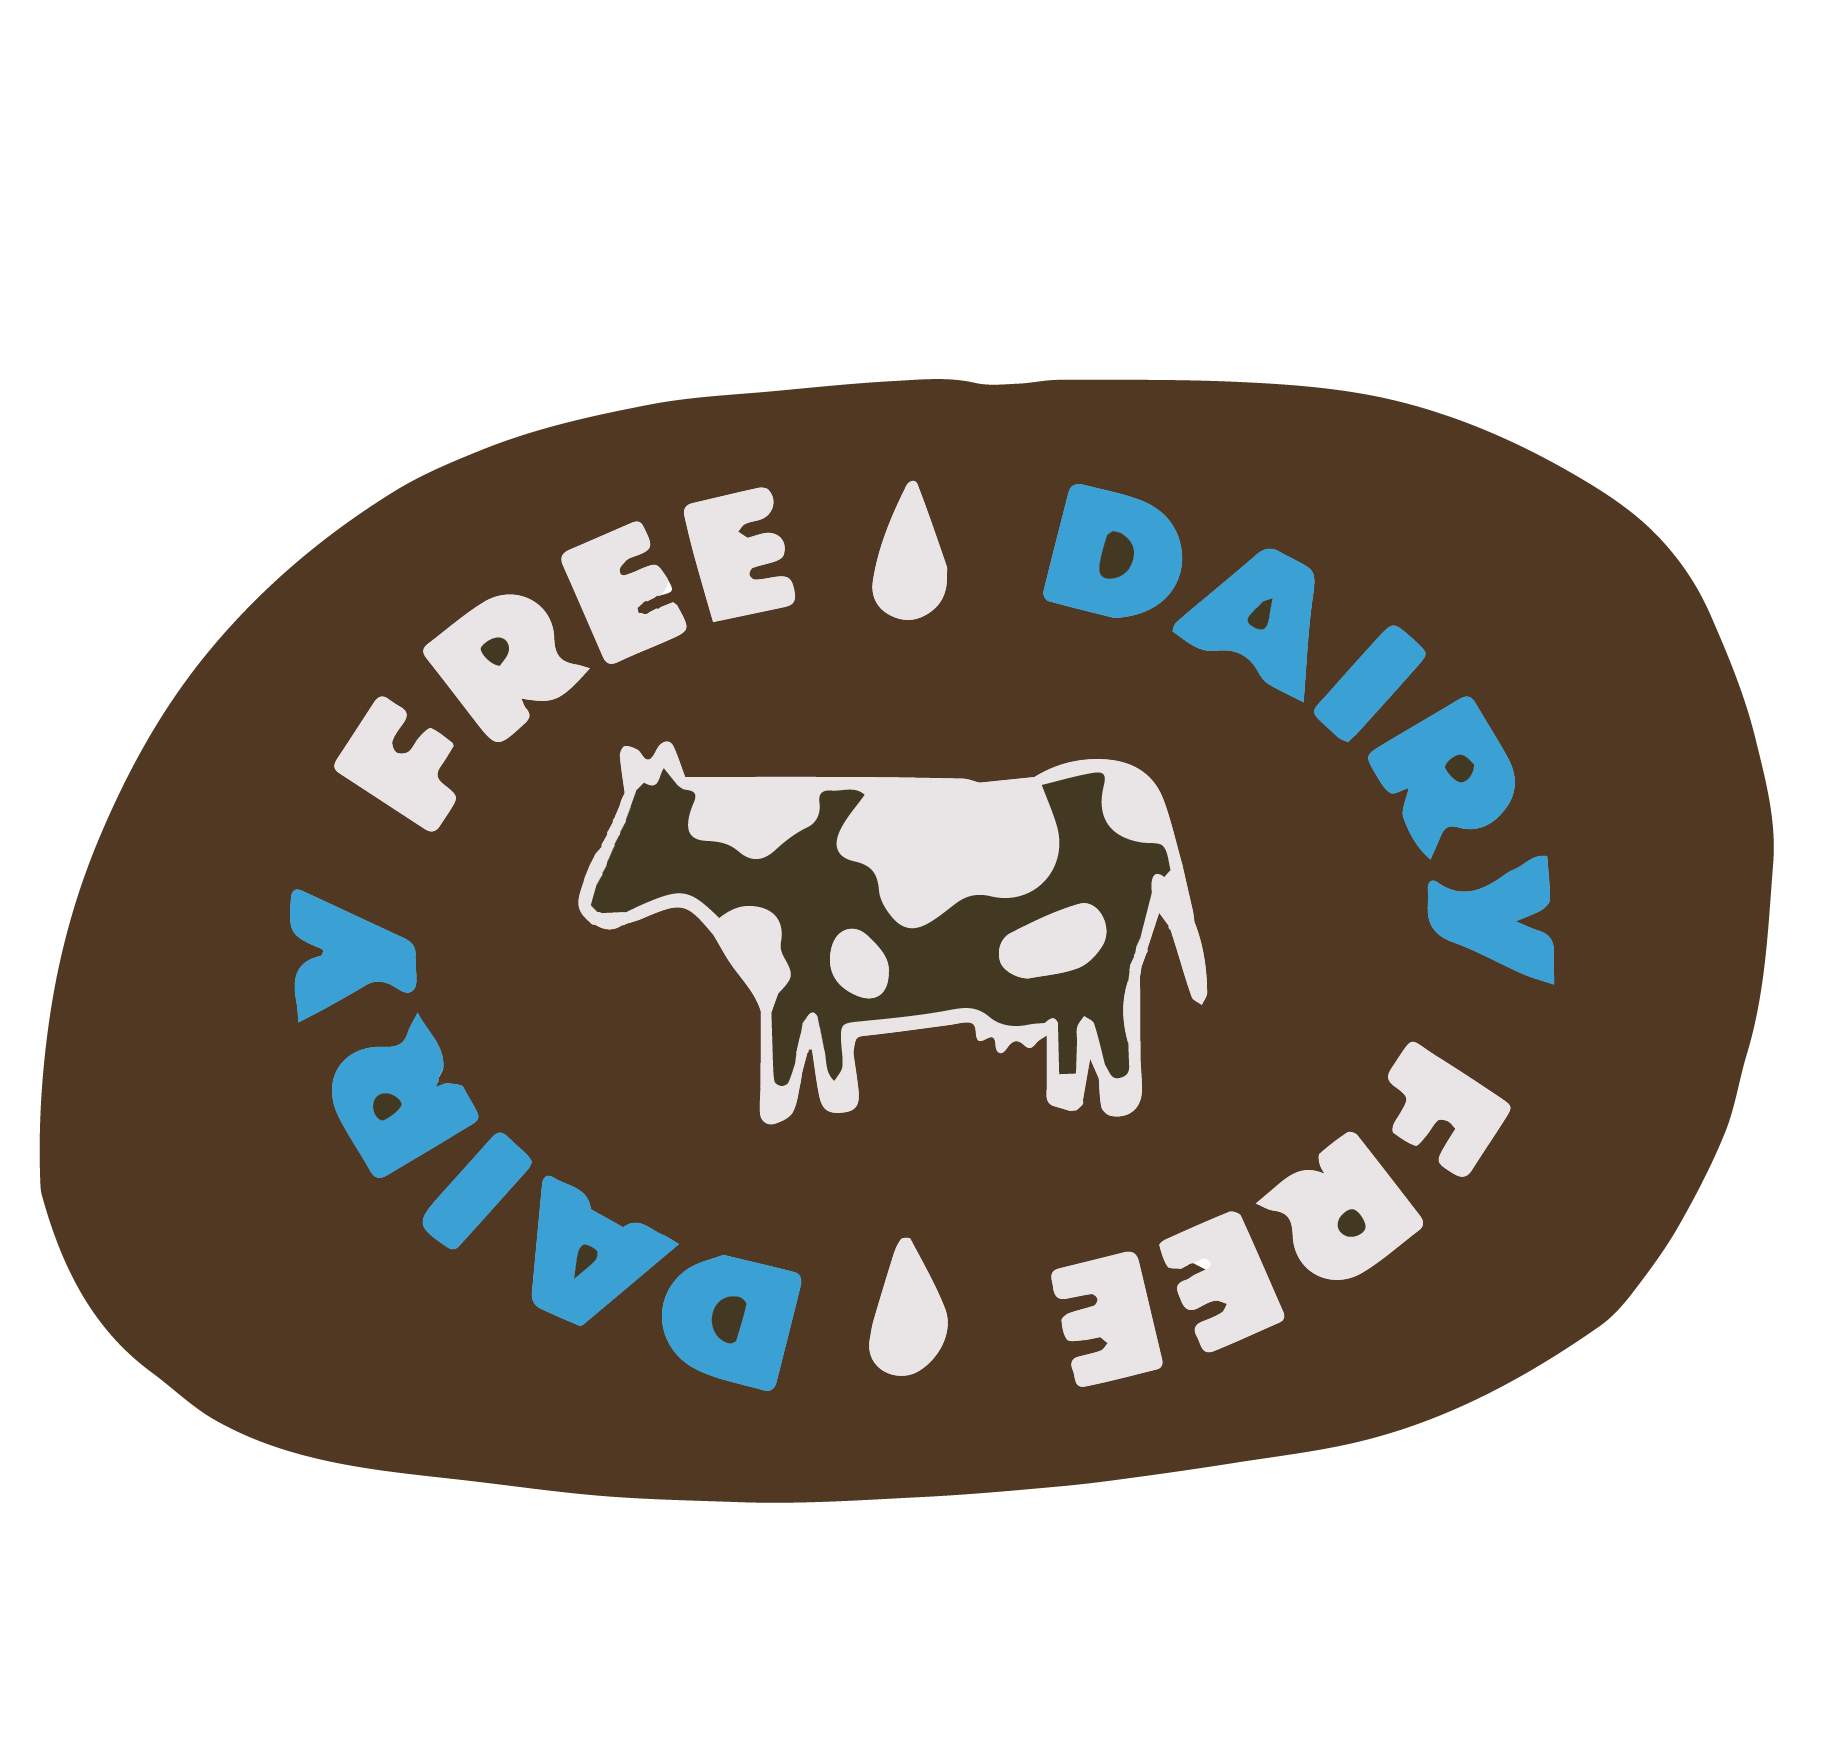 Dairy Free Sticker. Sticker is black with light blue and white font, rounded edges, and a cow graphic in the center.